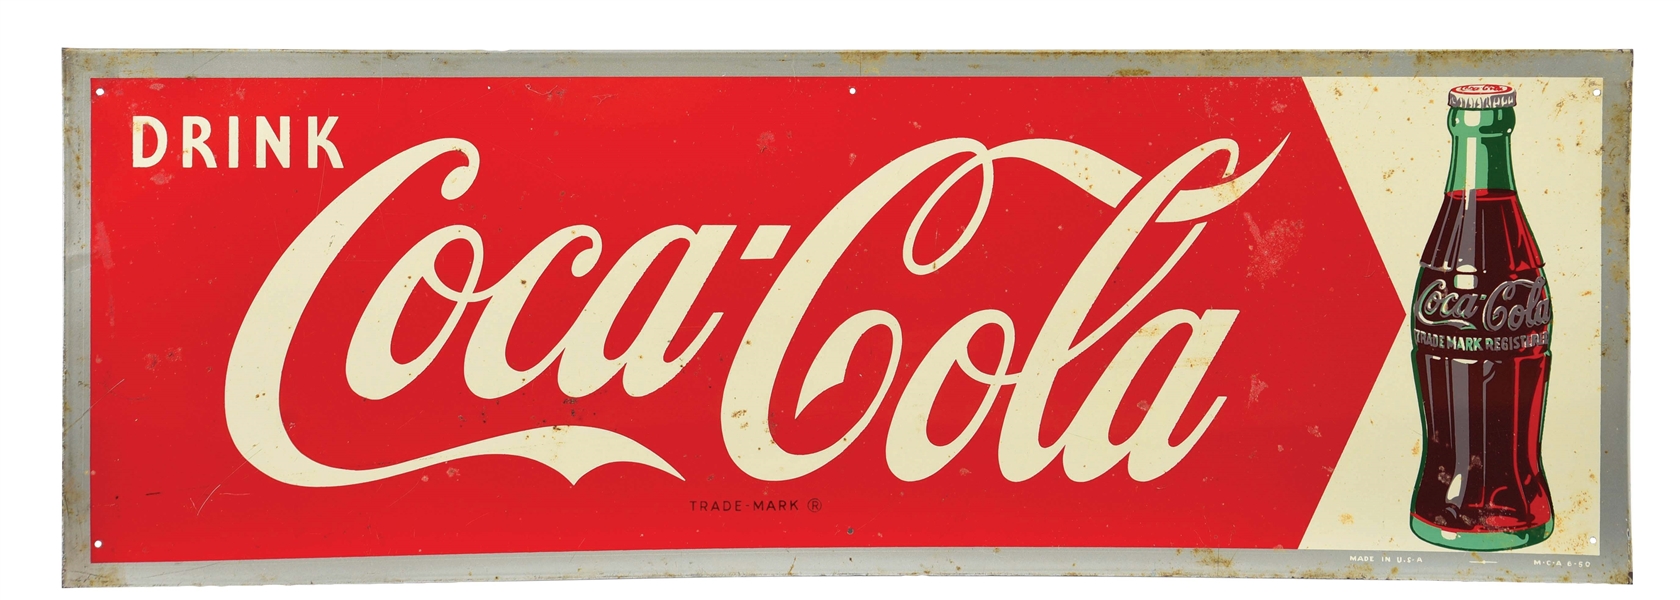 "DRINK COCA-COLA" SINGLE-SIDED TIN SIGN W/ BOTTLE GRAPHIC.